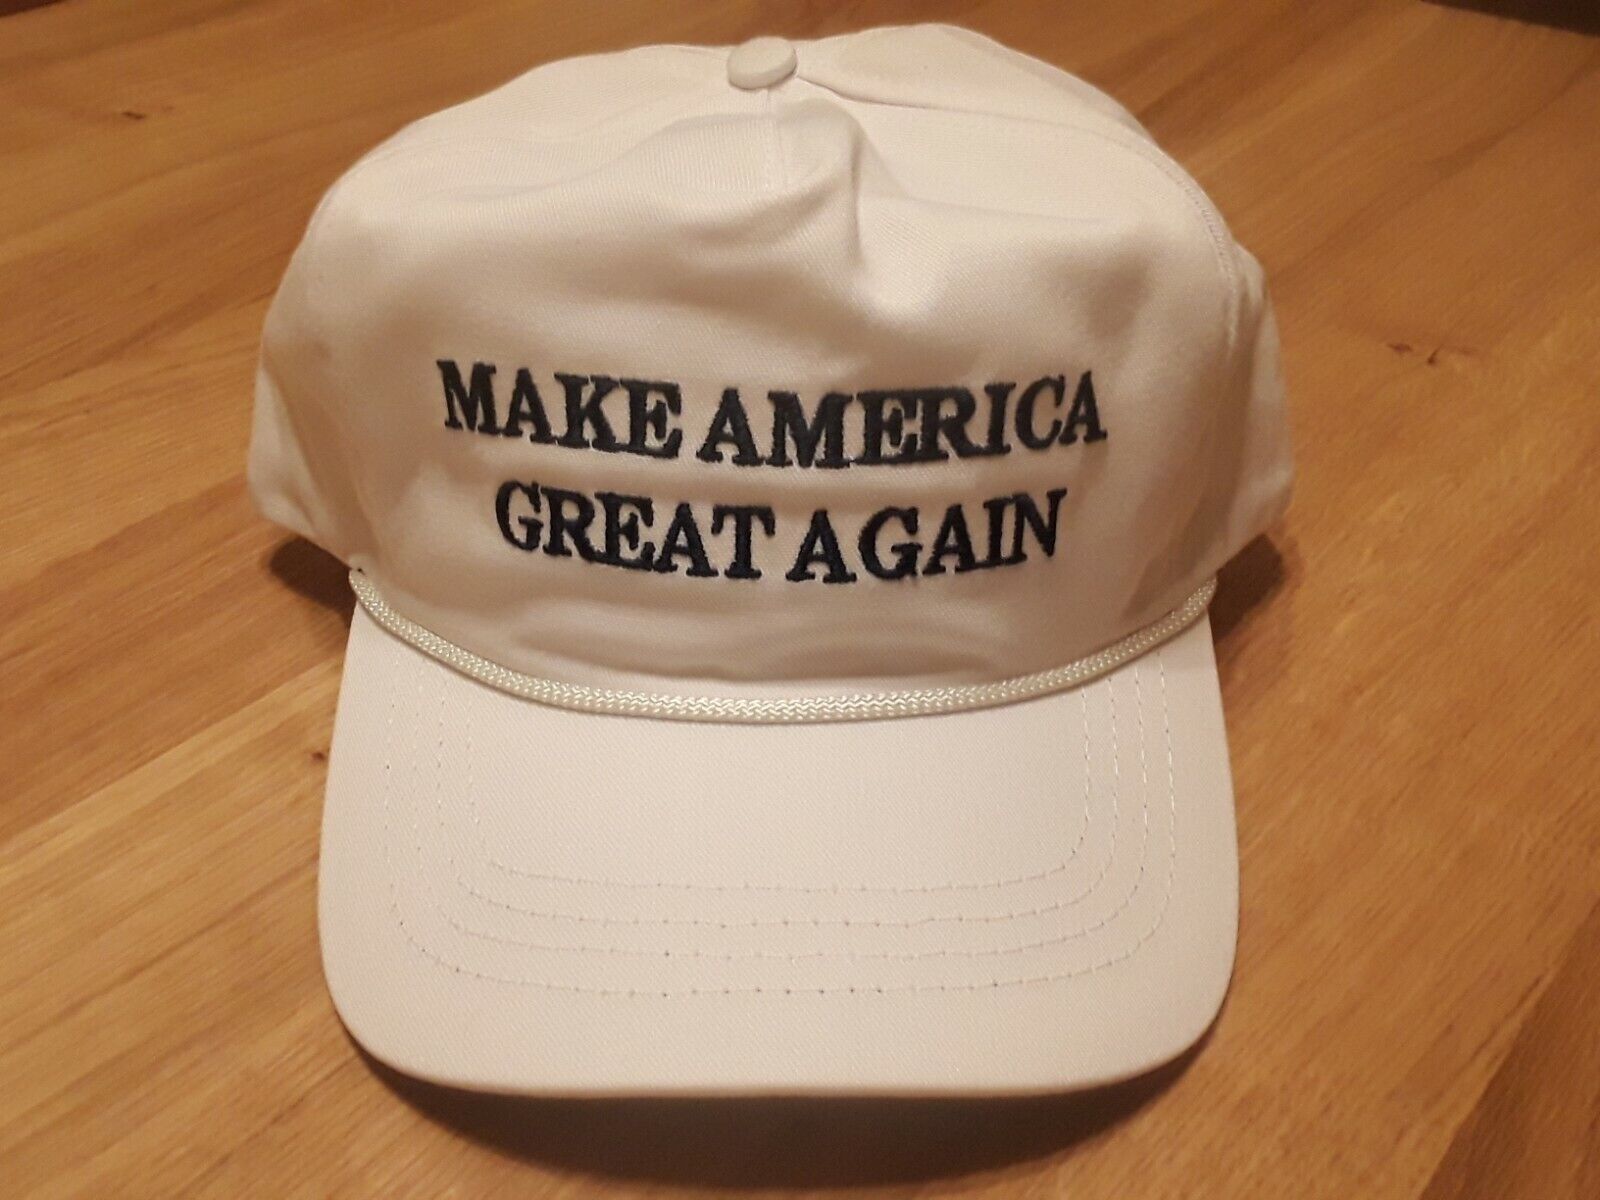 Official 2016 MAGA Hat NEVER WORN Genuine Donald Trump white hat by Cali Fame